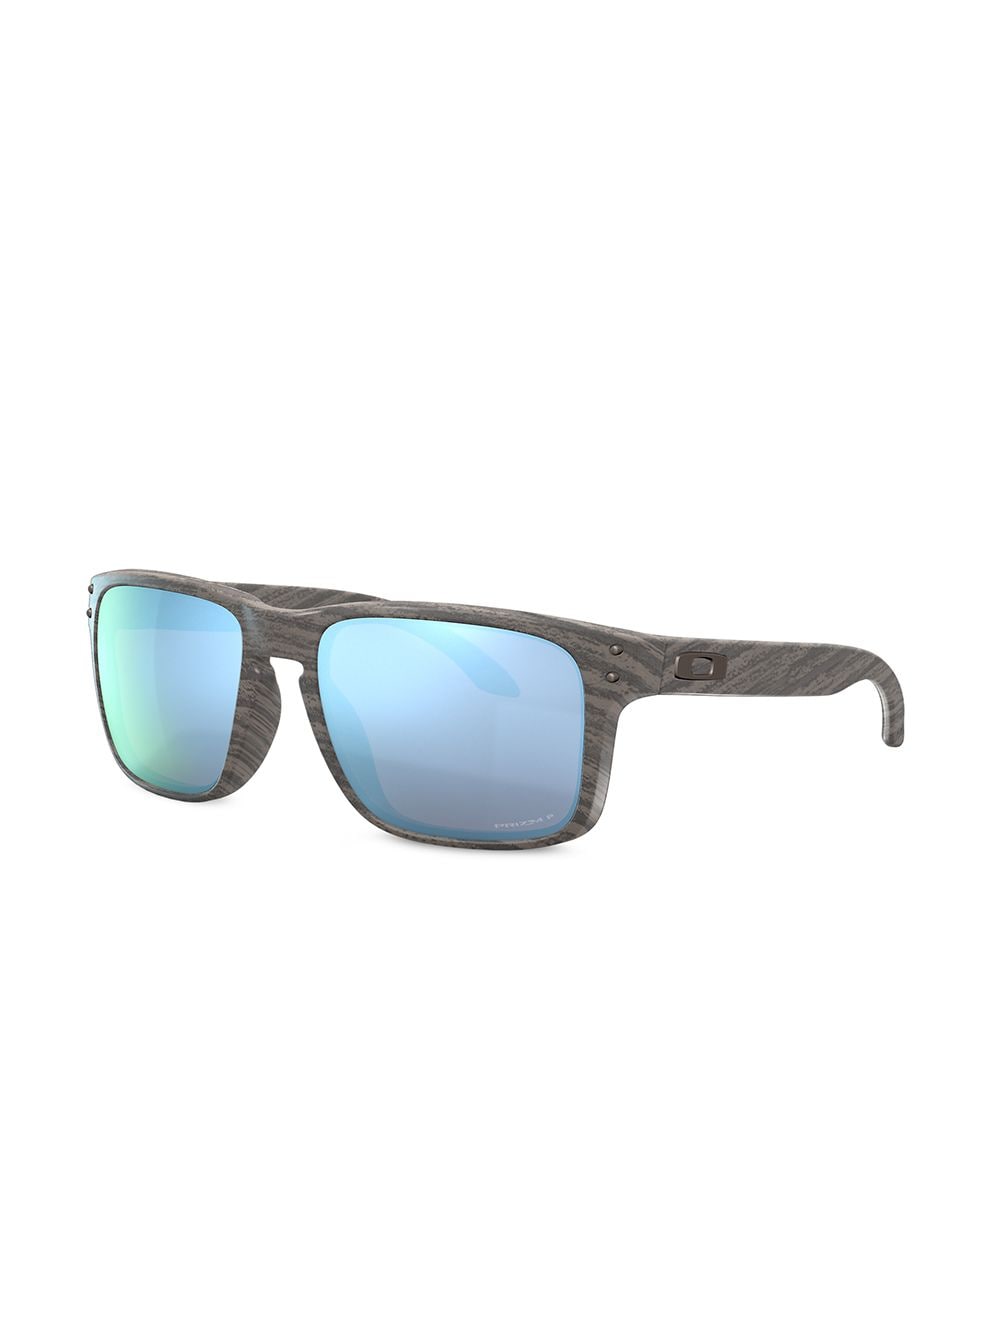 Brown and blue Holbrook gradient lens sunglasses